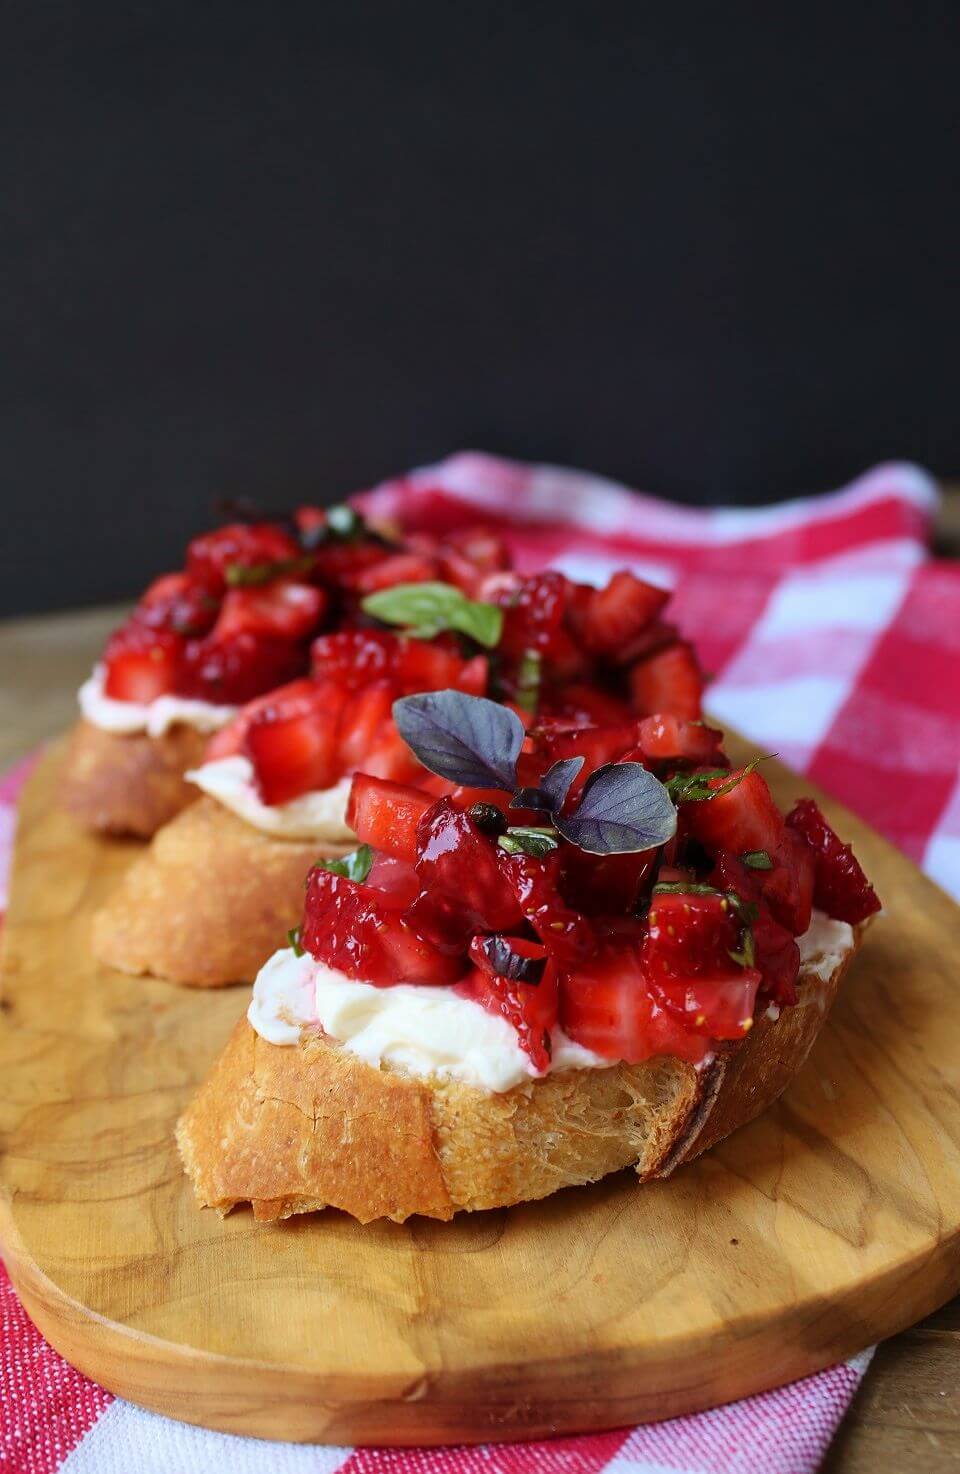 A wooden board holding Strawberry Basil Crostini: three slices of baguette topped with red strawberries and green basil.